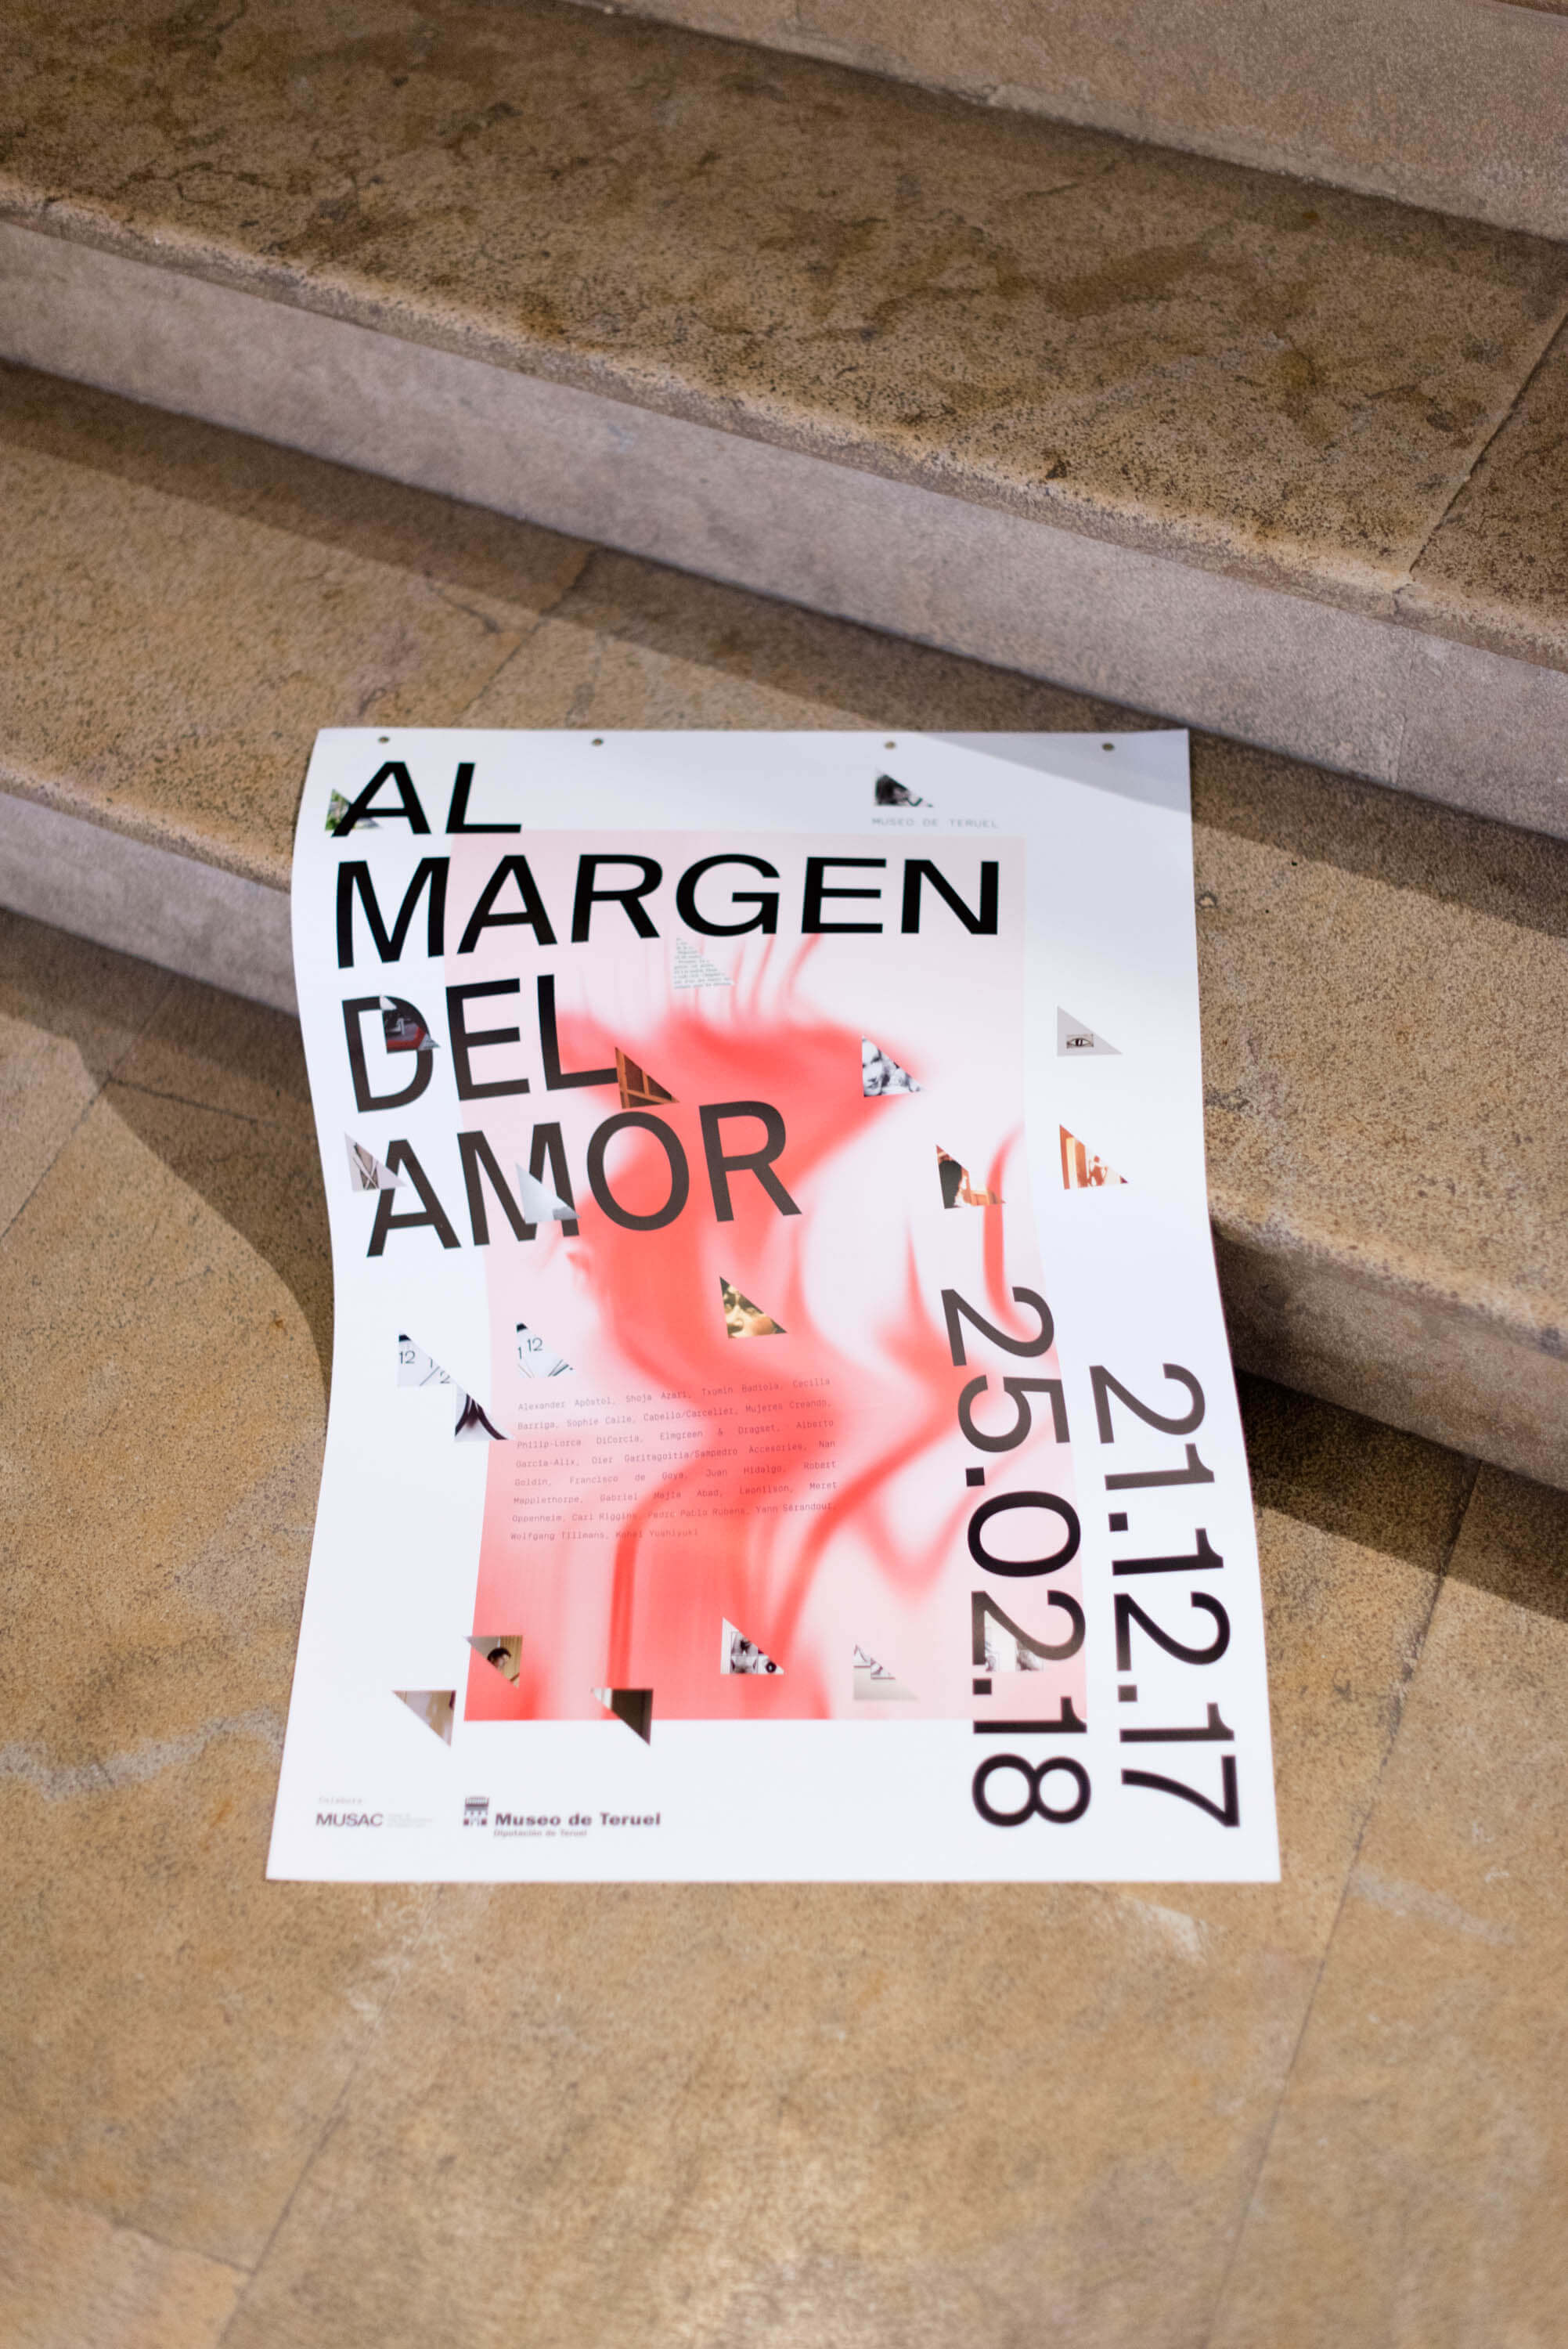 Al margen del amor by coolte.net - Creative Work - $i